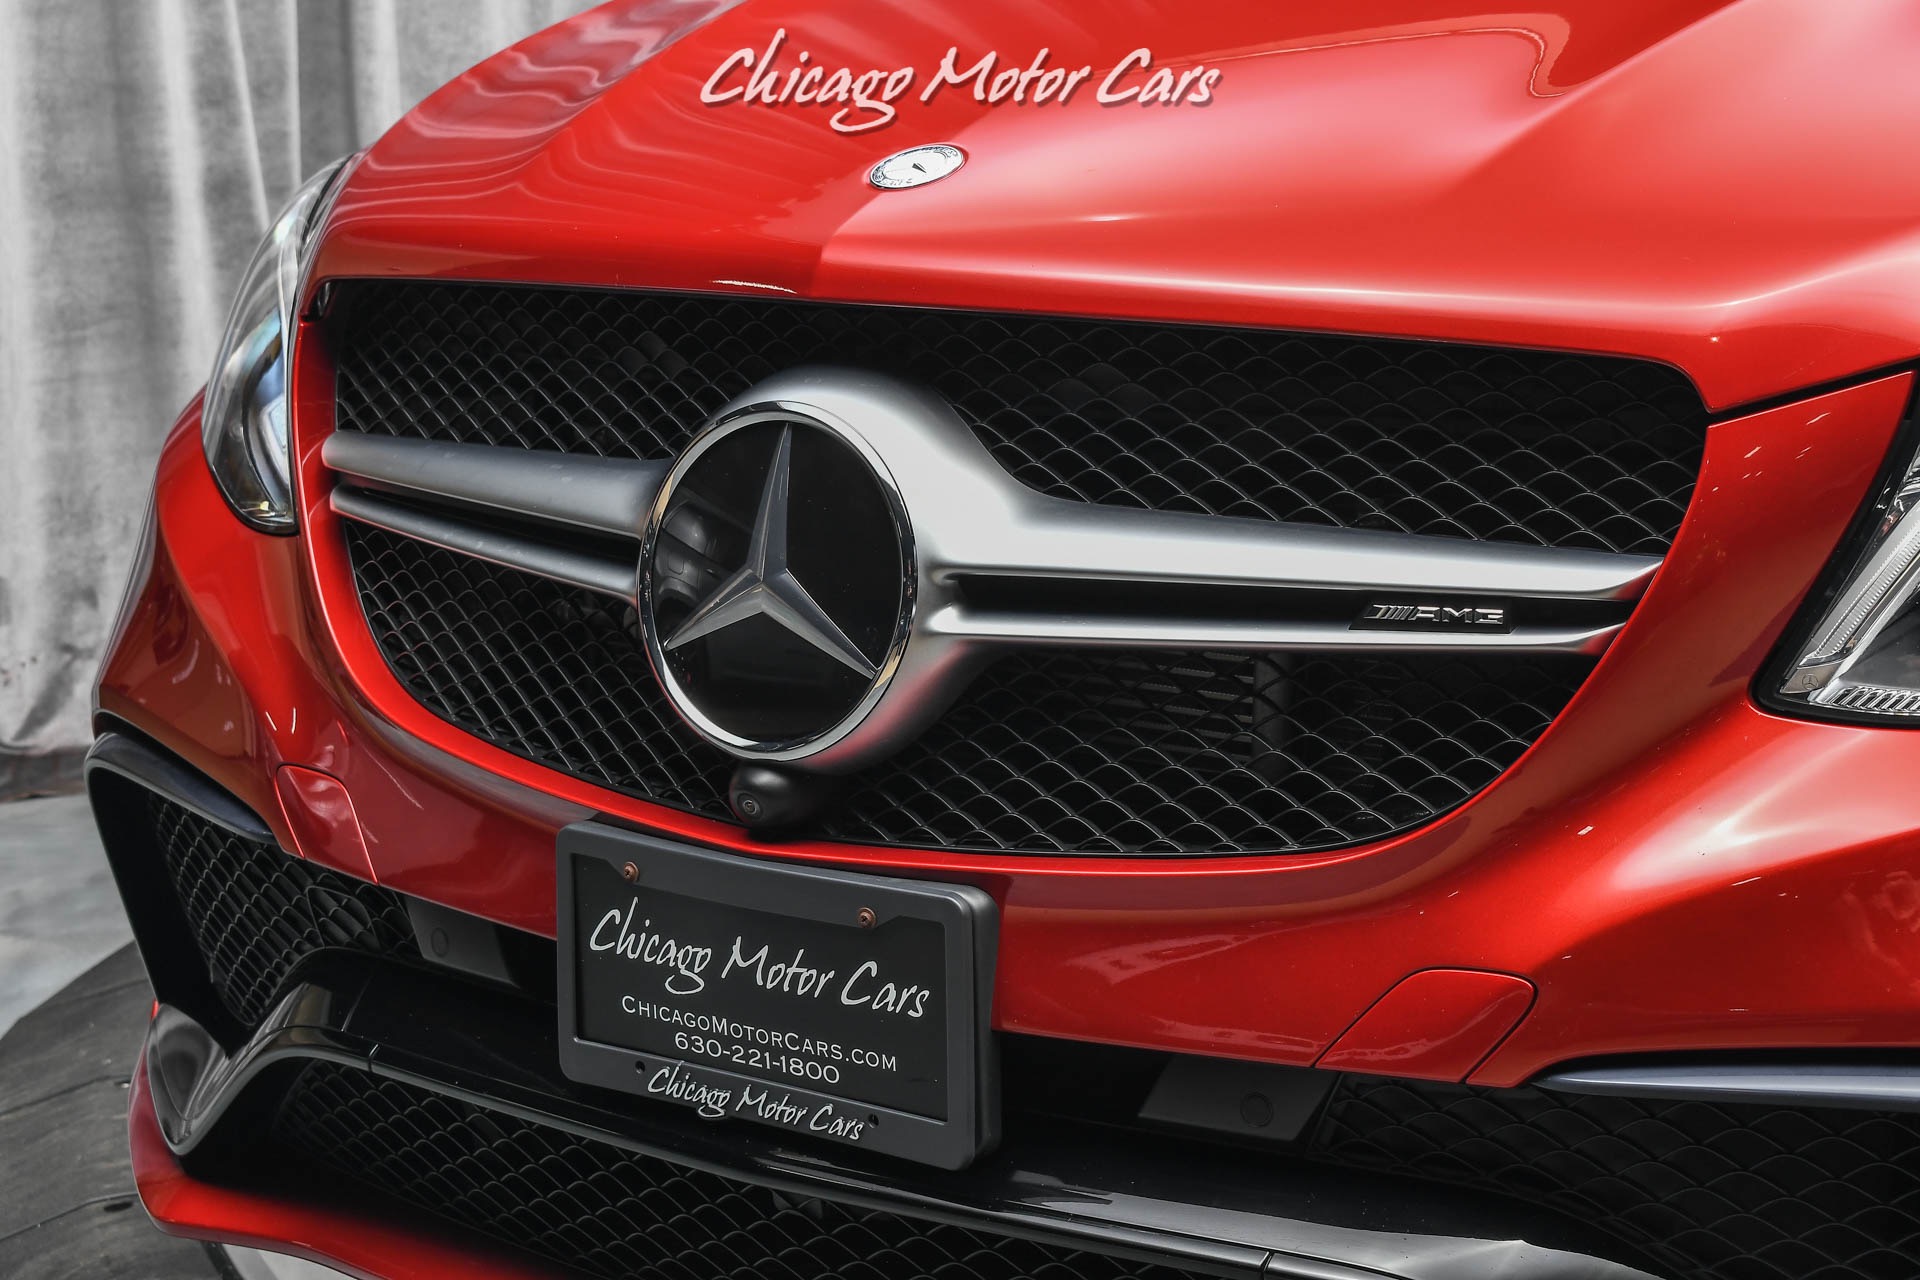 Used-2016-Mercedes-Benz-GLE63-S-AMG-4-Matic-SUV-MSRP-114430-designo-Cardinal-Red-Metallic-LOADED